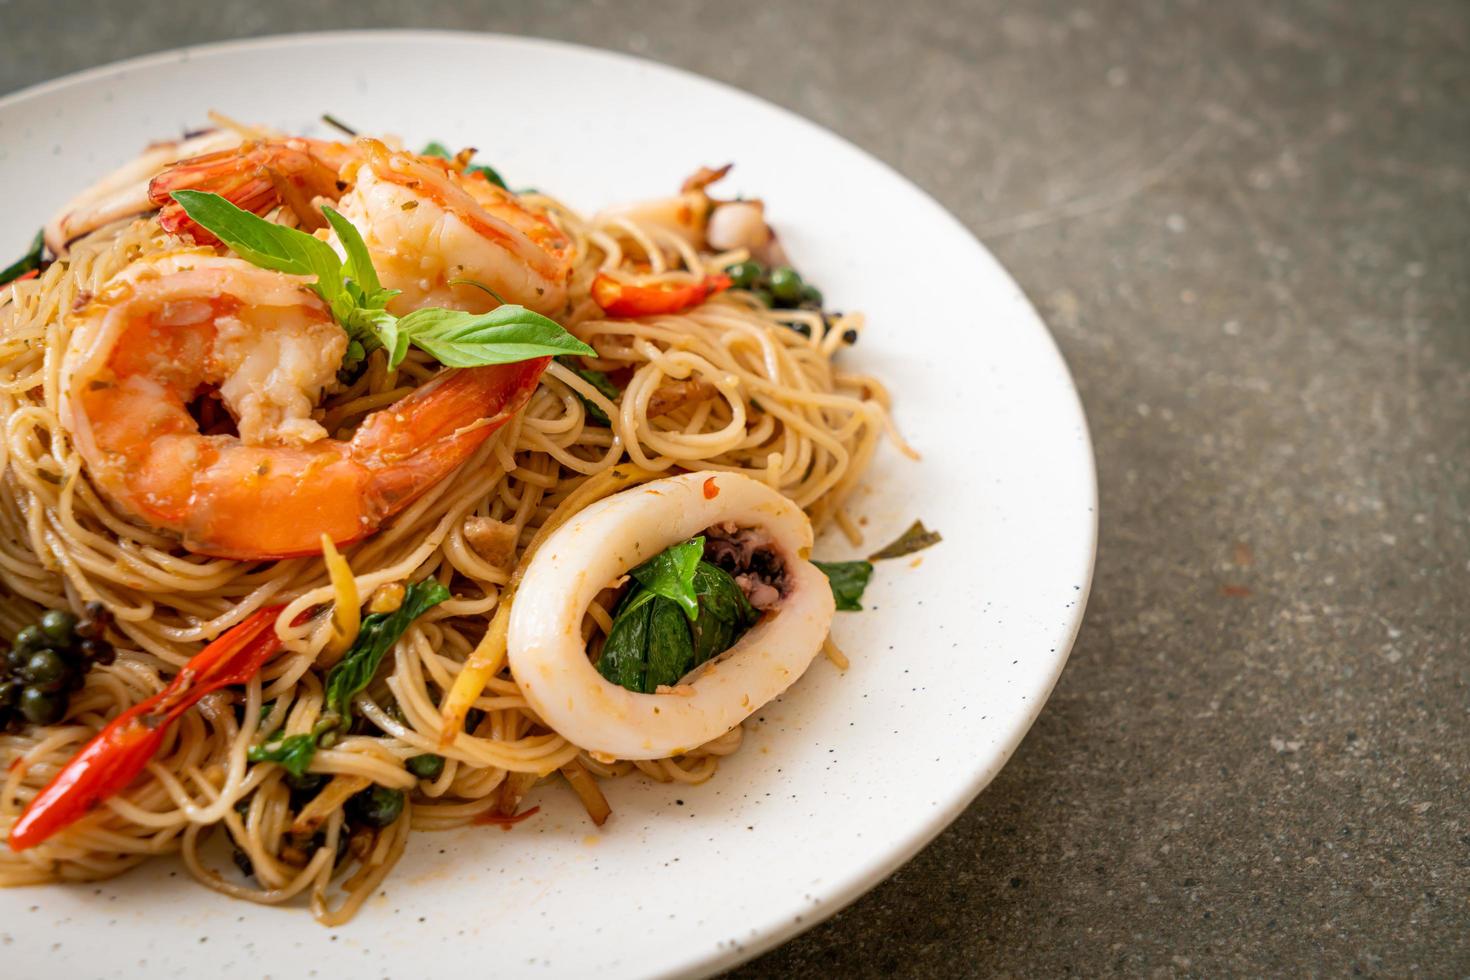 Stir-fried Chinese noodles with basil, chili, shrimp, and squid - Asian food style photo